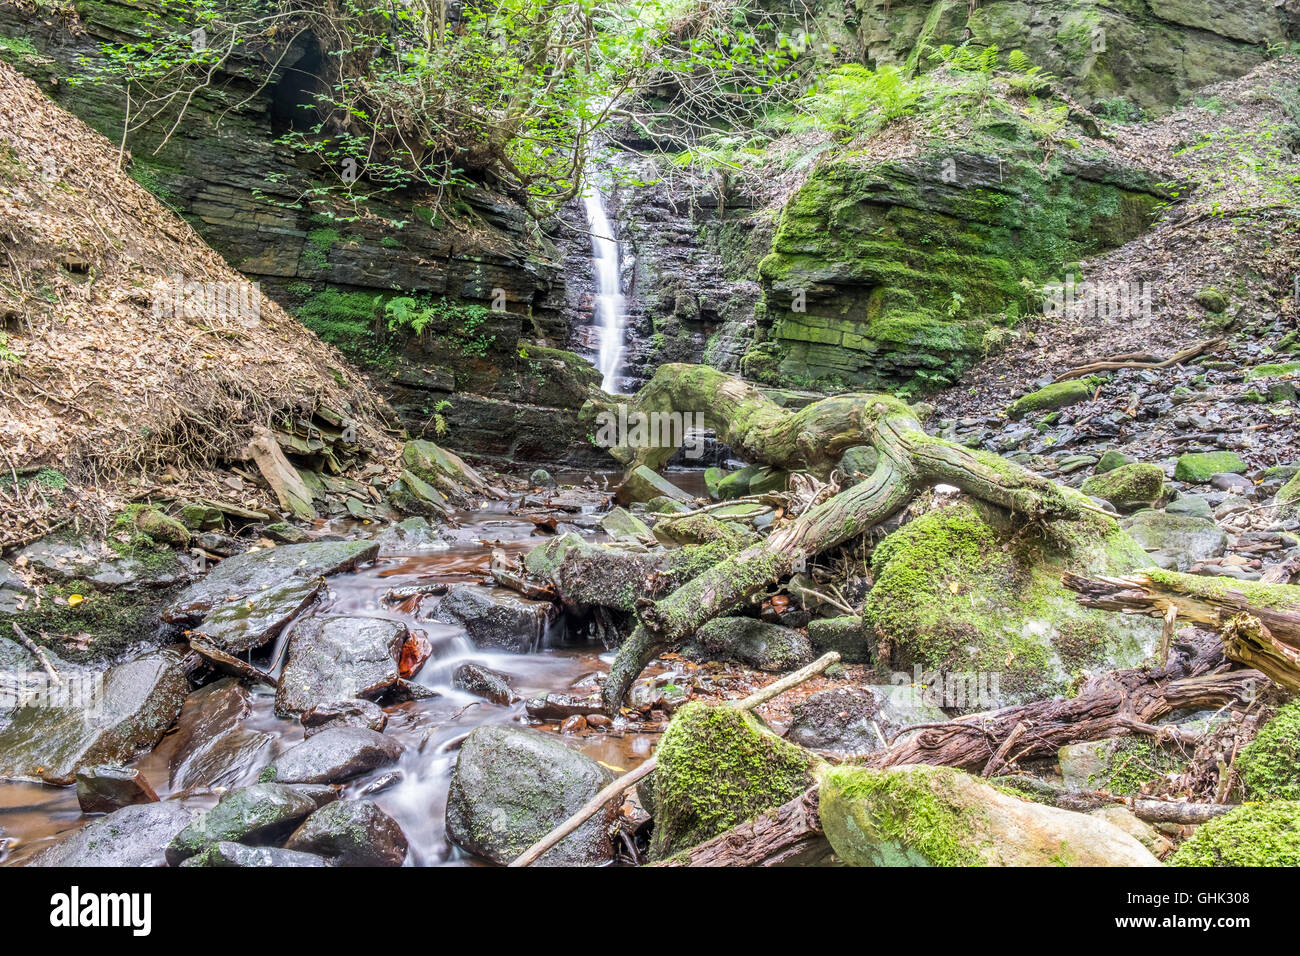 A small waterfall running down a small rock face into a small river with tree trunks that has fallen down the embankment. Stock Photo